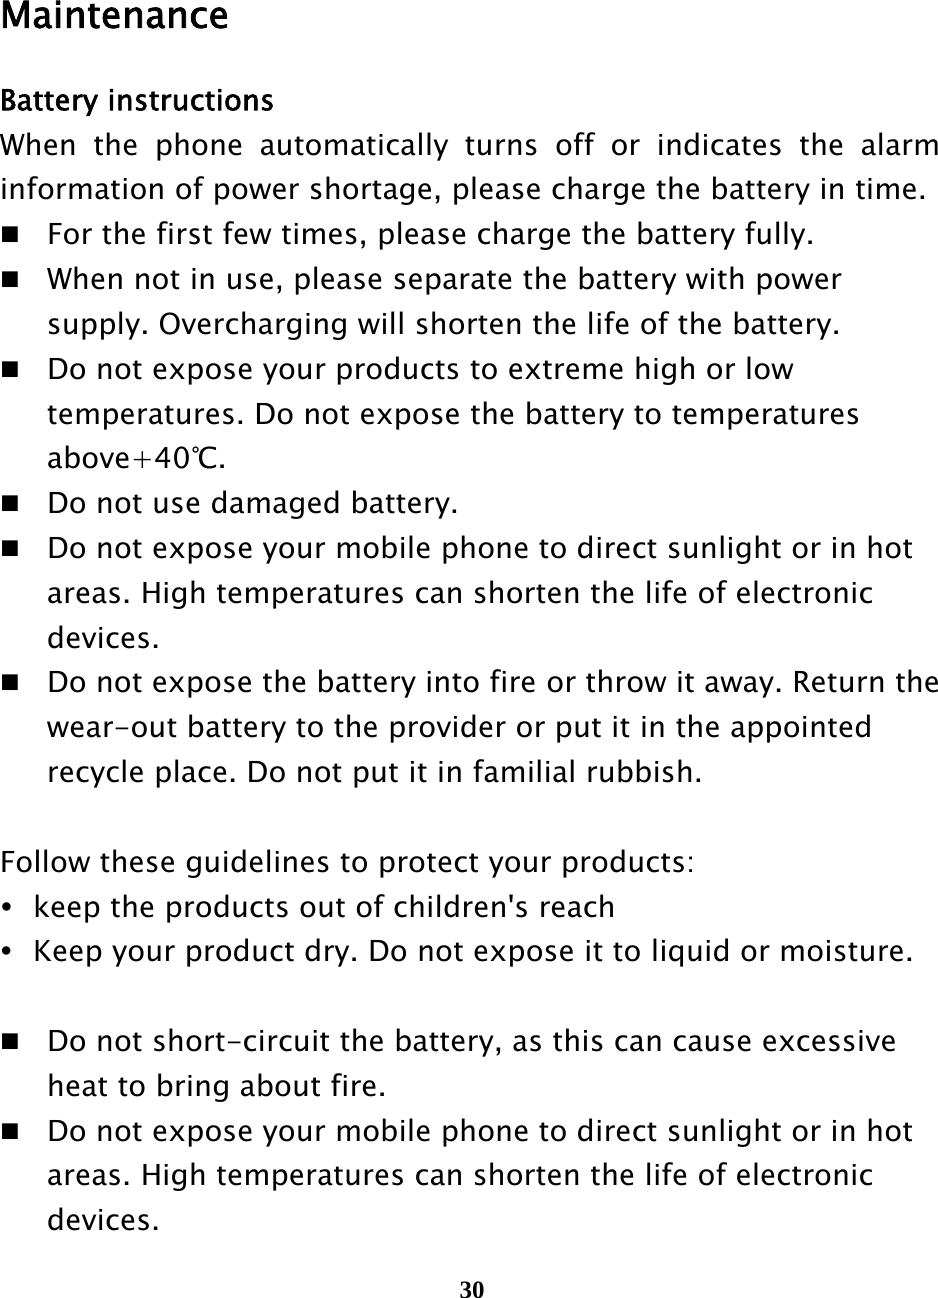  30    Maintenance Battery instructions When the phone automatically turns off or indicates the alarm information of power shortage, please charge the battery in time.  For the first few times, please charge the battery fully.  When not in use, please separate the battery with power     supply. Overcharging will shorten the life of the battery.  Do not expose your products to extreme high or low     temperatures. Do not expose the battery to temperatures    above+40℃.  Do not use damaged battery.  Do not expose your mobile phone to direct sunlight or in hot     areas. High temperatures can shorten the life of electronic    devices.  Do not expose the battery into fire or throw it away. Return the     wear-out battery to the provider or put it in the appointed     recycle place. Do not put it in familial rubbish.  Follow these guidelines to protect your products:    keep the products out of children&apos;s reach    Keep your product dry. Do not expose it to liquid or moisture.     Do not short-circuit the battery, as this can cause excessive     heat to bring about fire.  Do not expose your mobile phone to direct sunlight or in hot     areas. High temperatures can shorten the life of electronic    devices. 